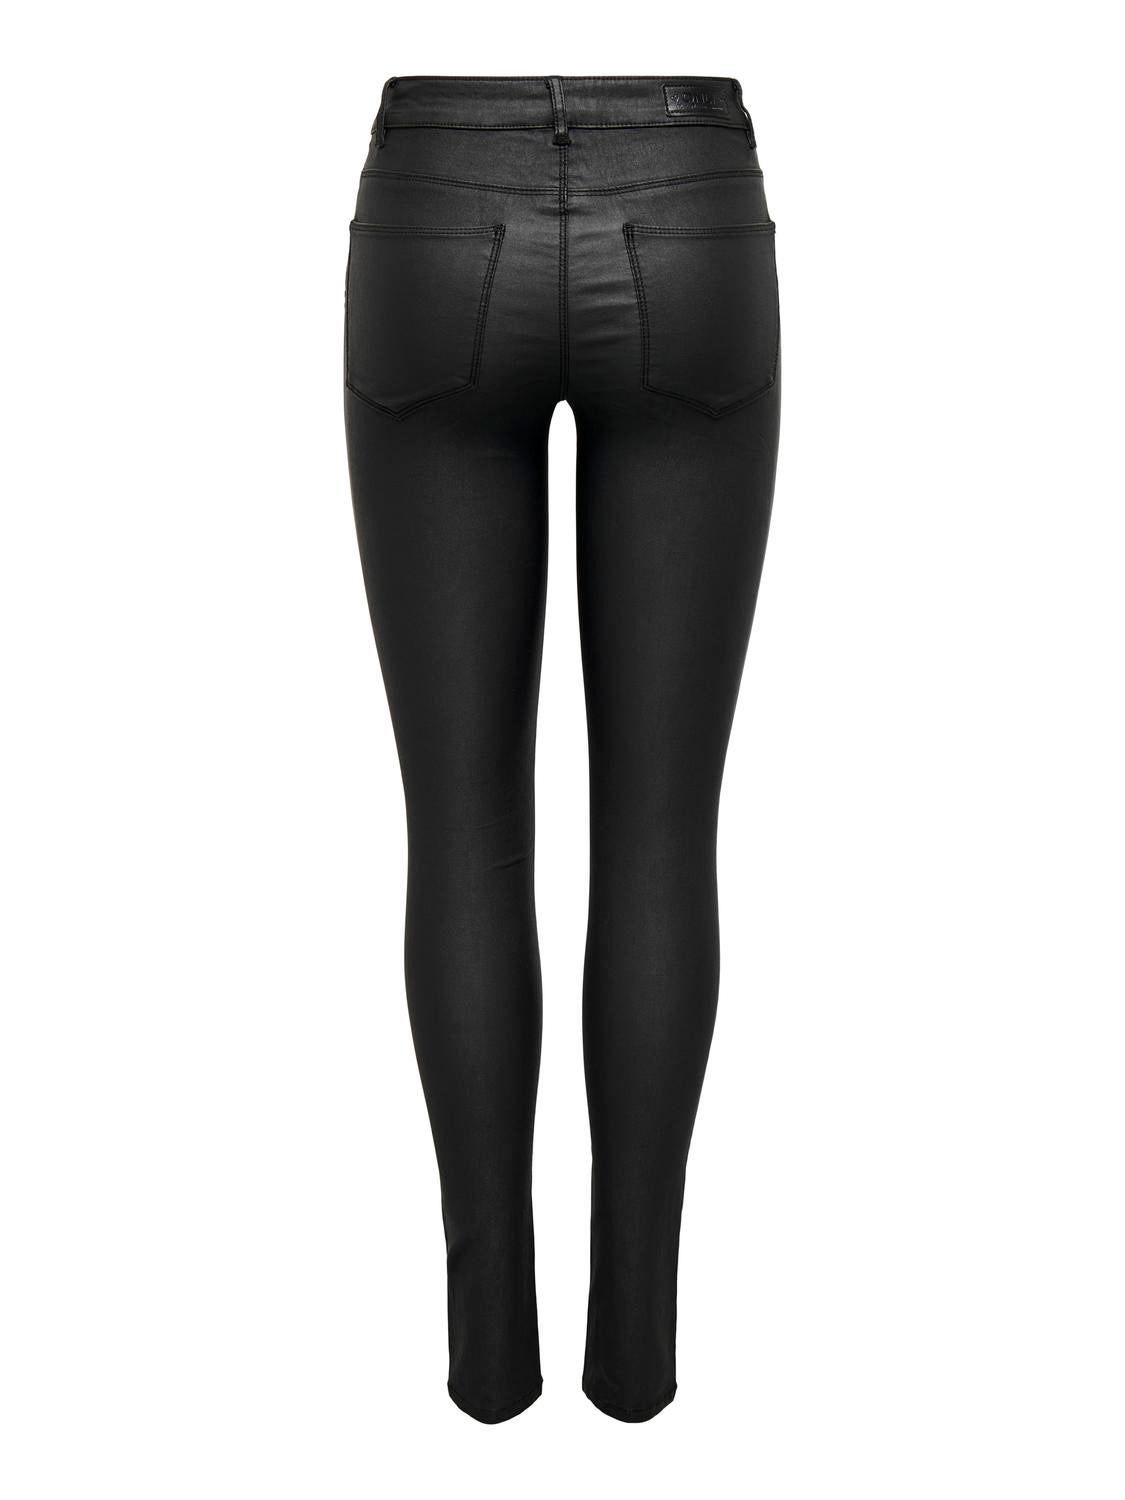 N++A Women Soft PU Leather Pants High Stretch Skinny Trousers Pencil Pants  Hip Push Up Leggings Bodycon Jegging (Coffee) (L) at Amazon Women's  Clothing store